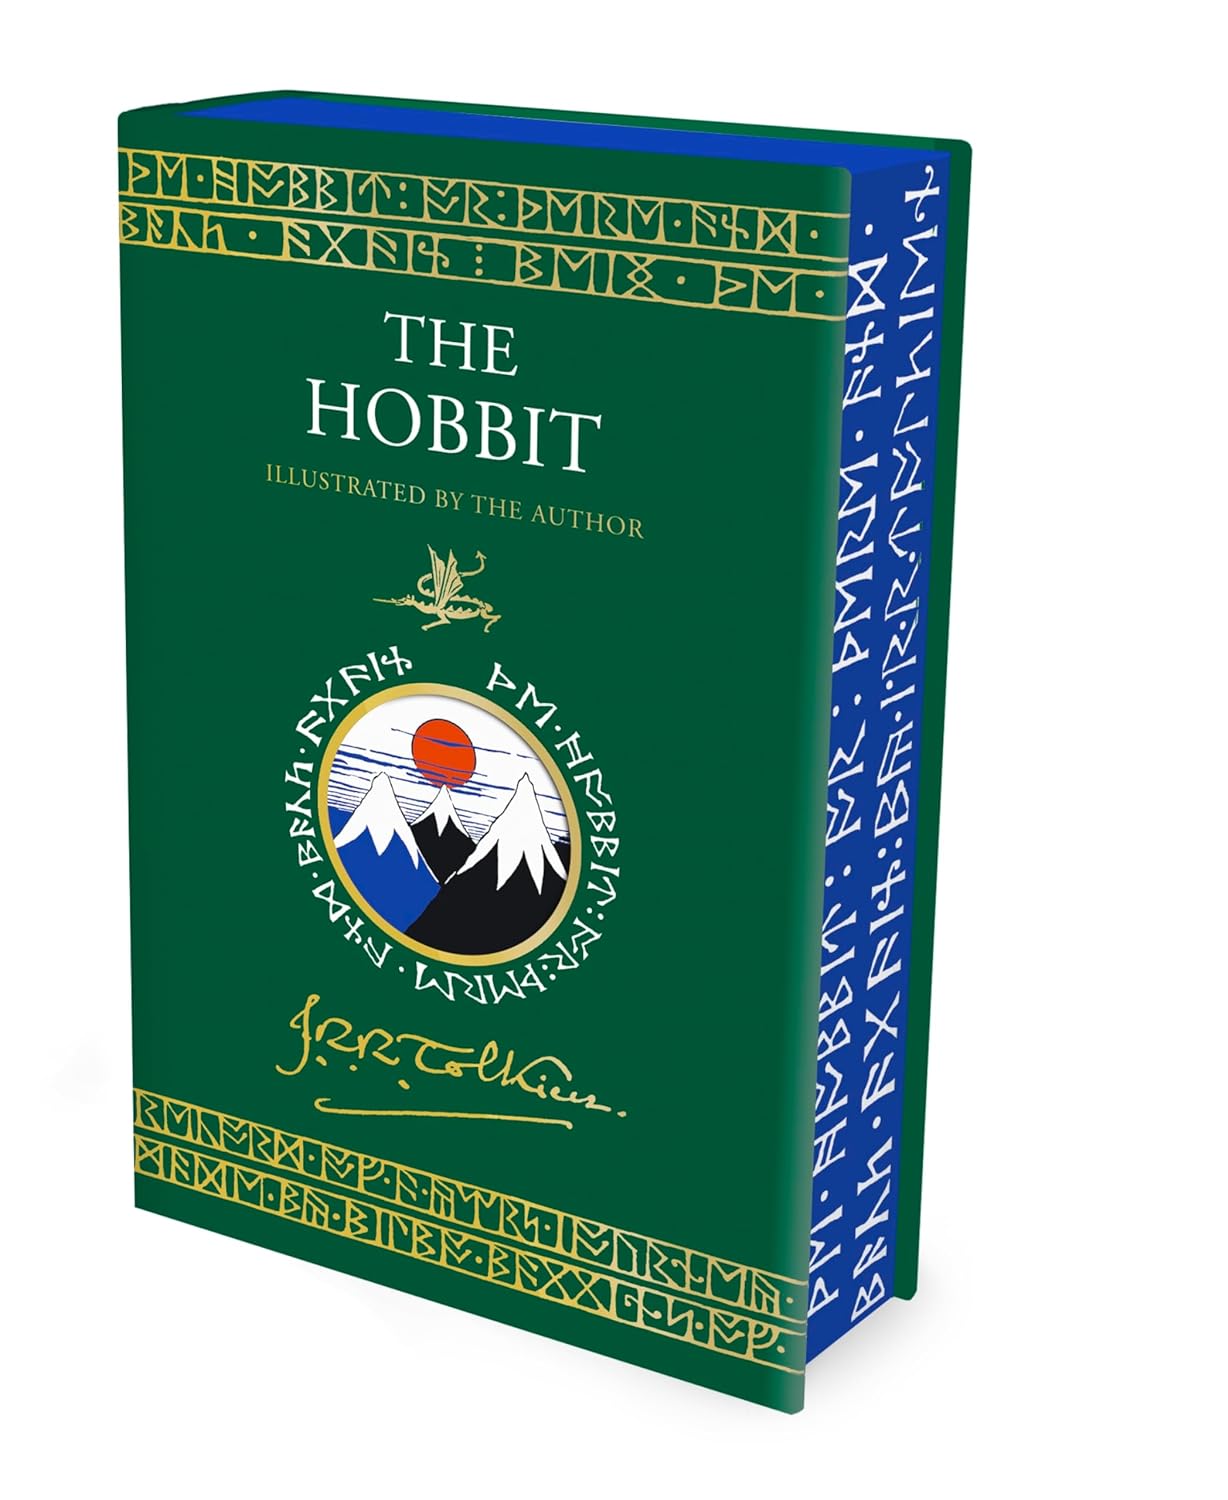 Hobbit (single volume, illustrated by author)